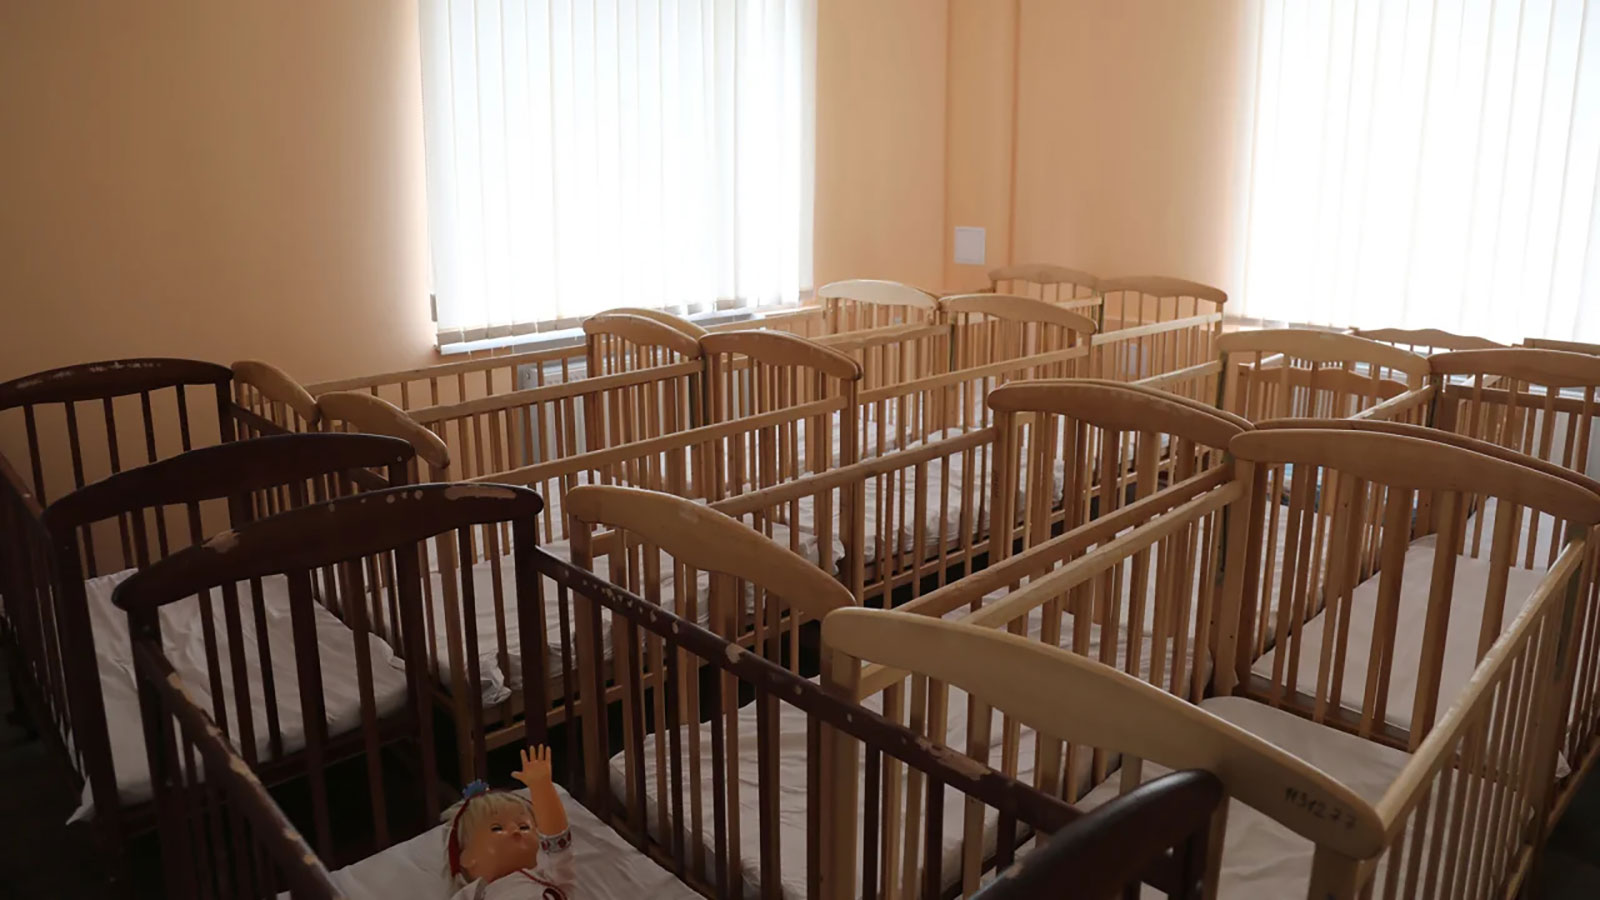 Cots stand empty at the orphanage in Kherson. 